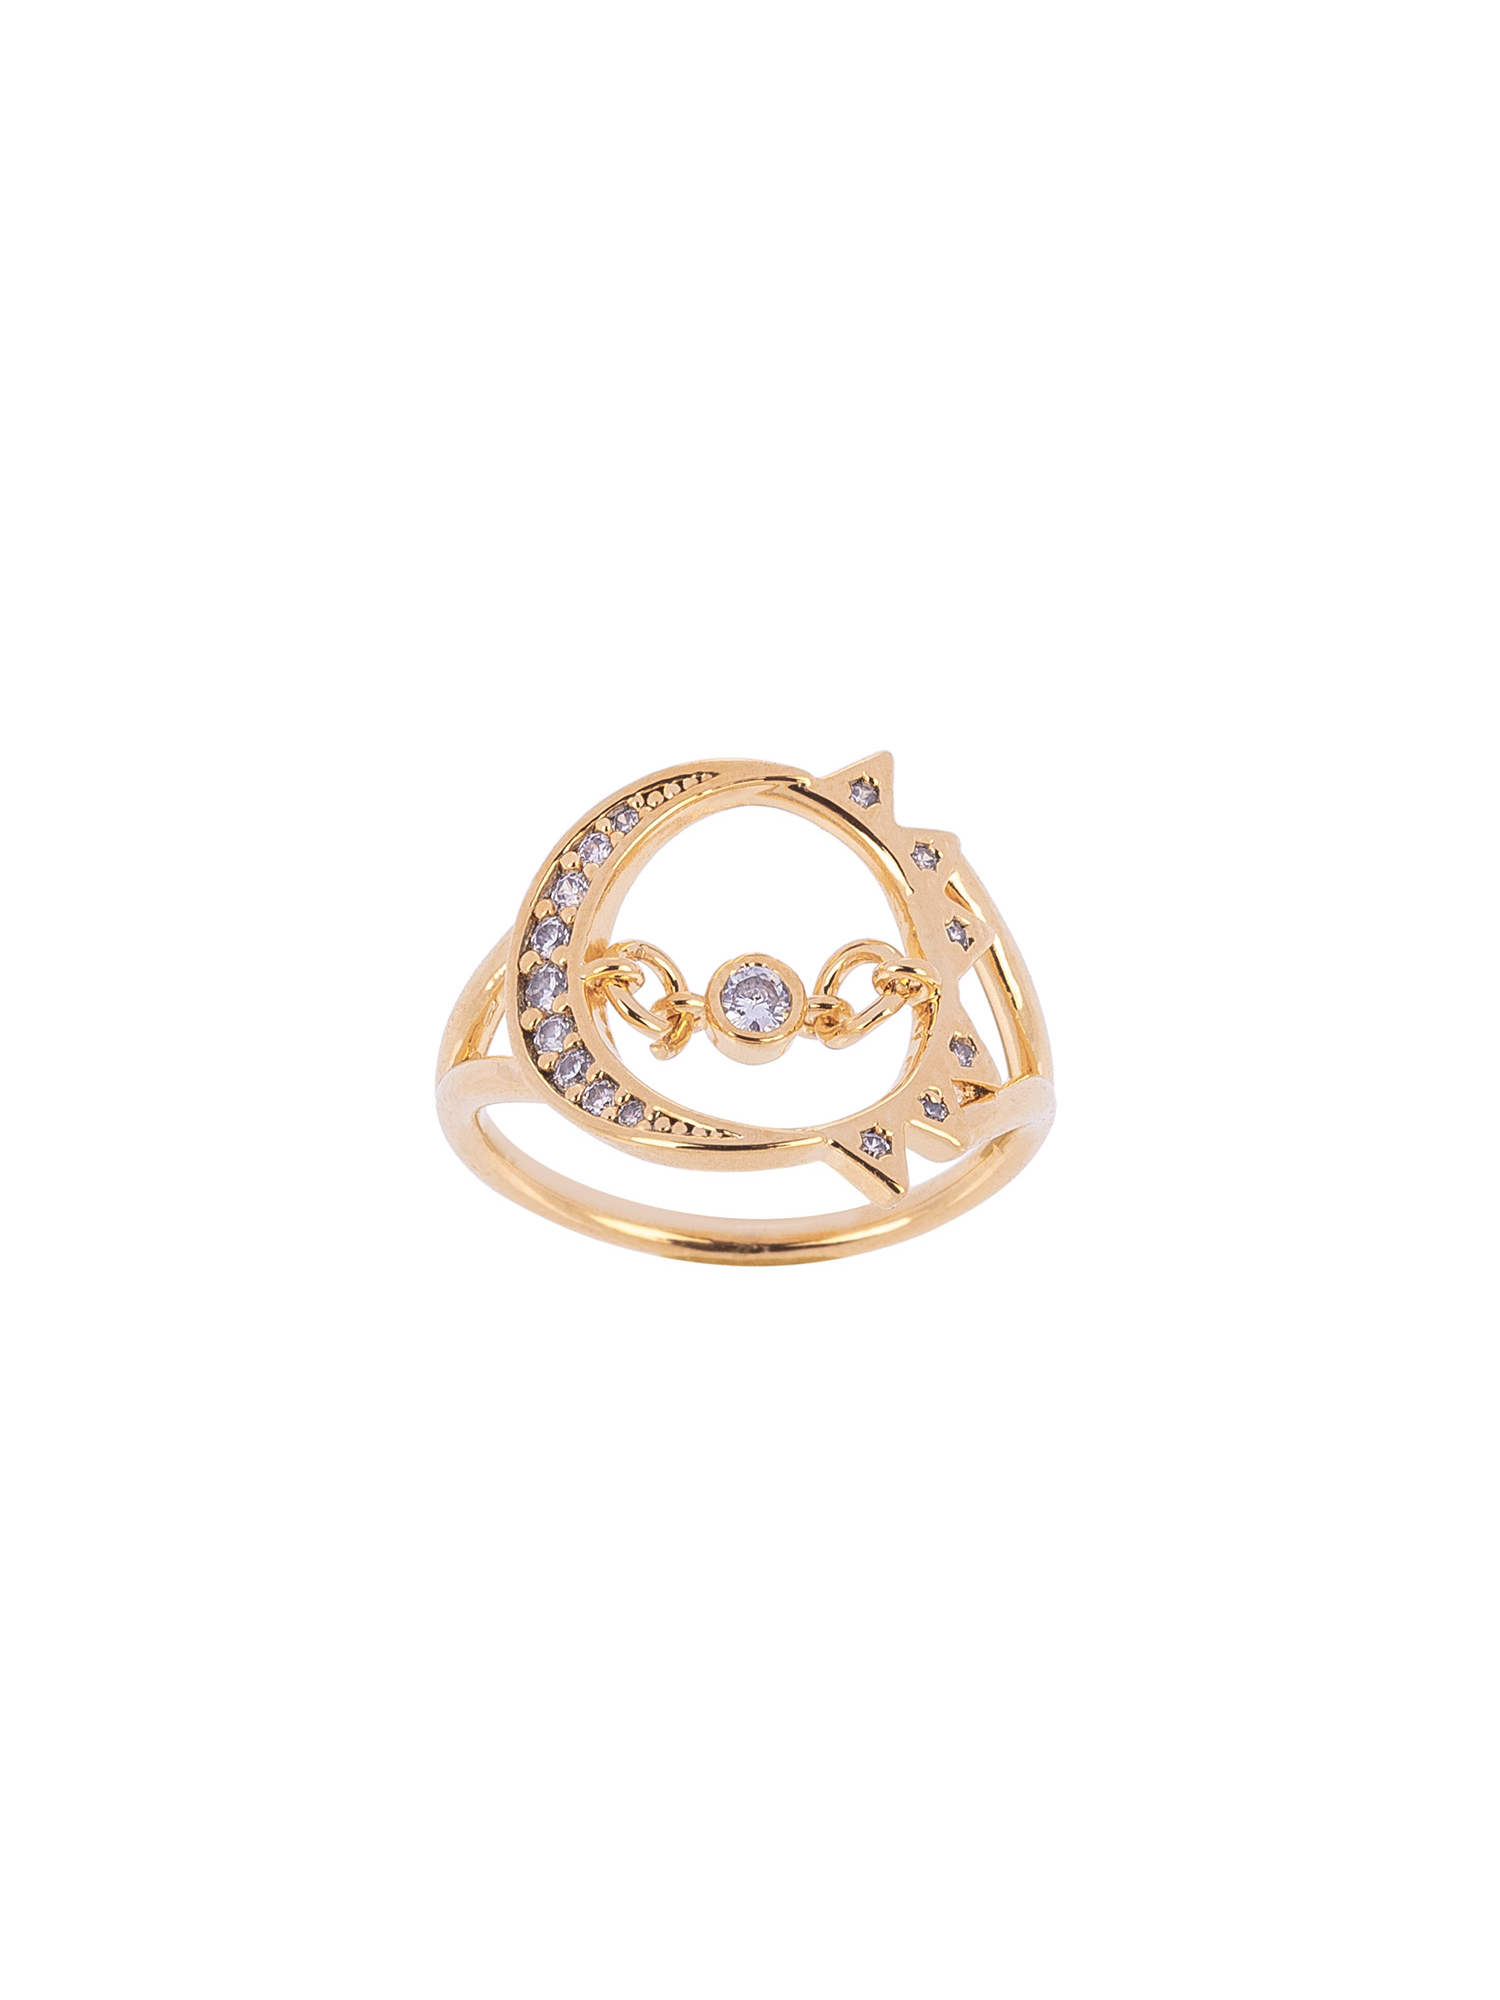 MOON RISE RING GOLD